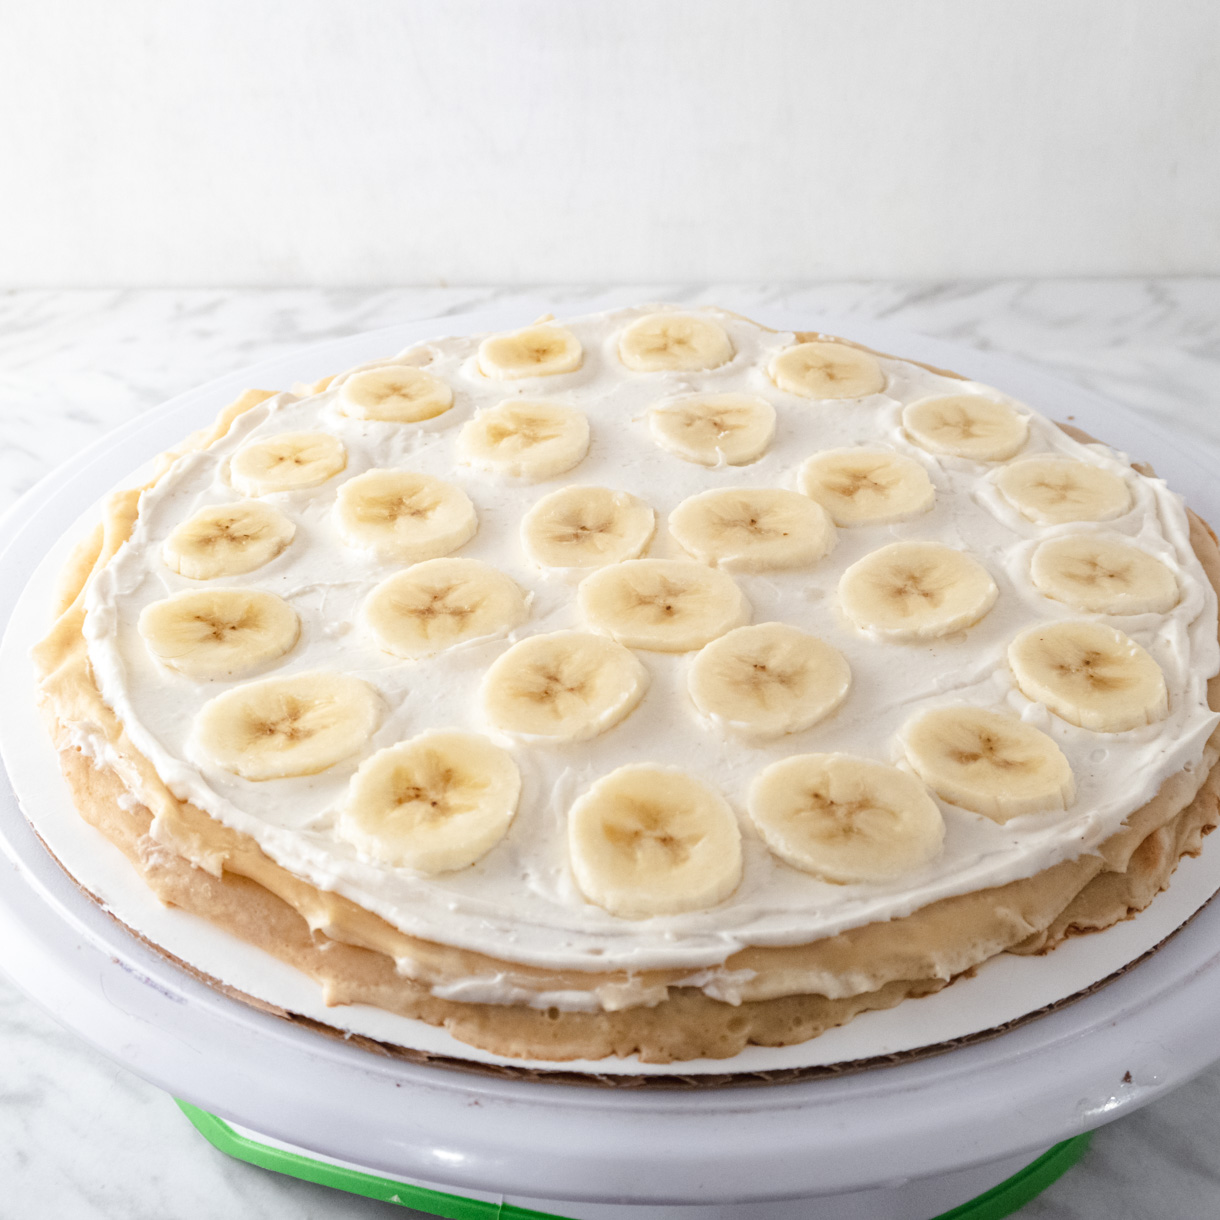 A crepe on a white cake board with a thin lawyer of diplomate cresm spread on it's surface and some sliced bananas placed all over the cream.